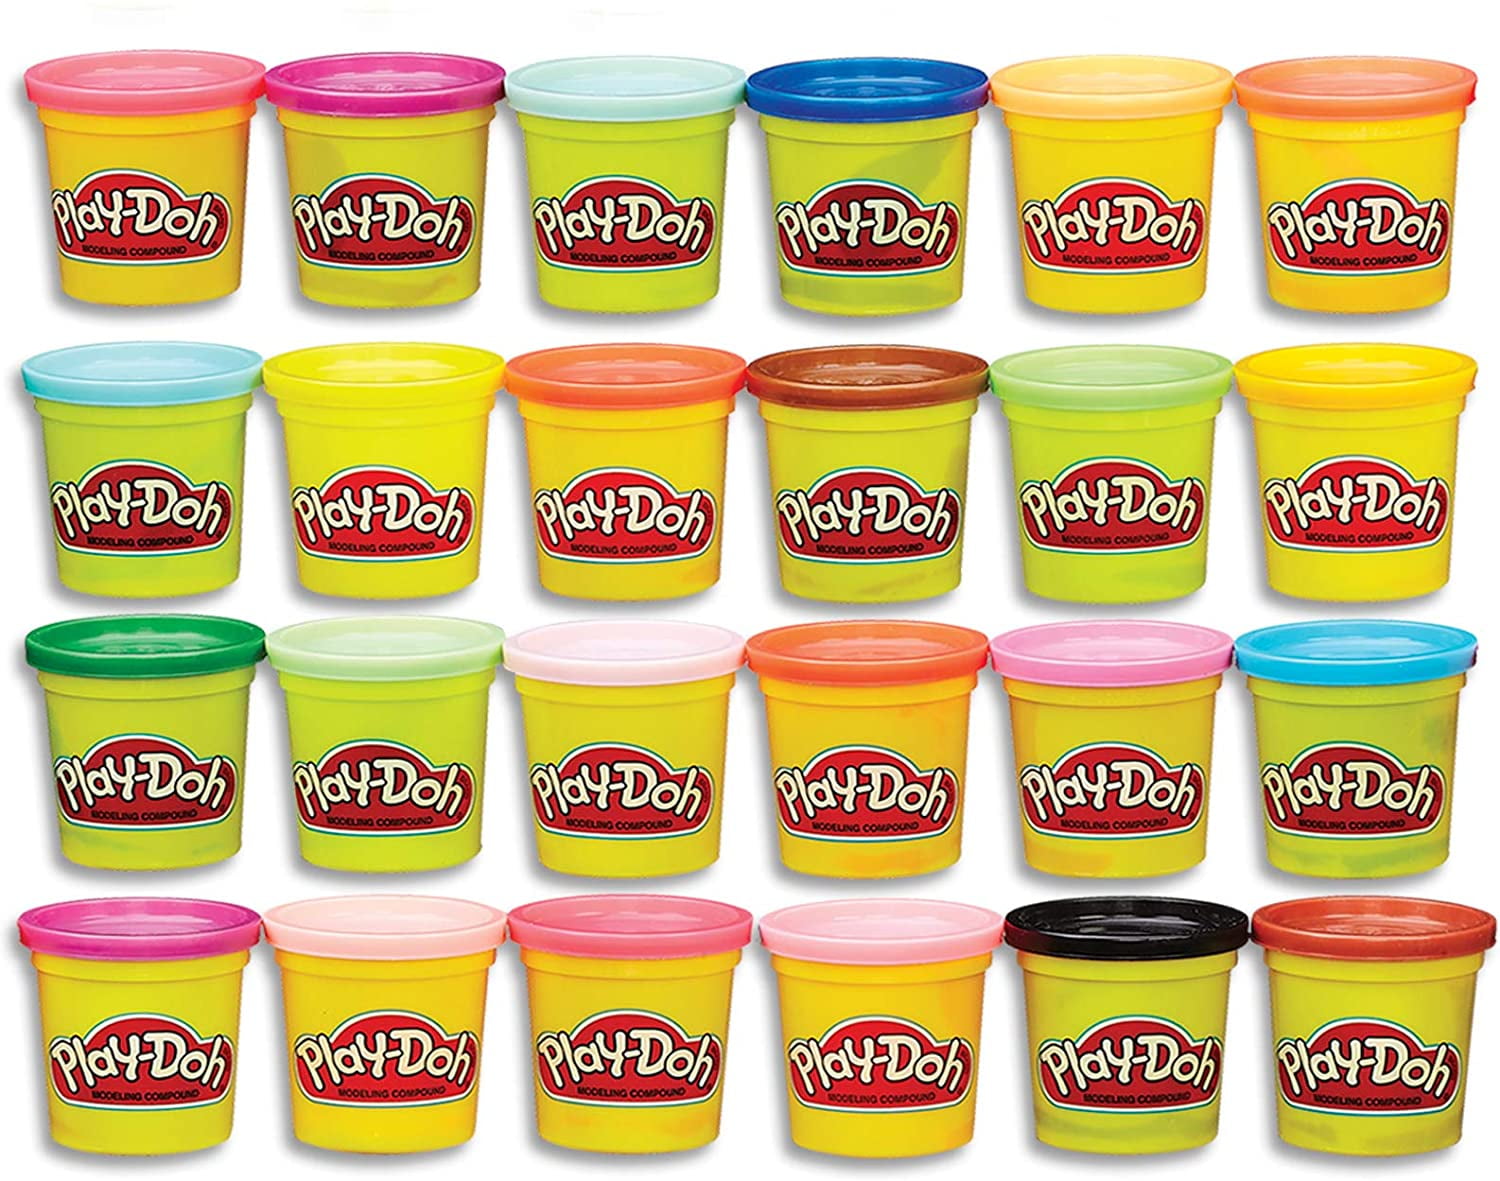 Play-Doh Bulk 12-Pack of Red Non-Toxic Modeling Compound, 4-Ounce Cans -  Play-Doh